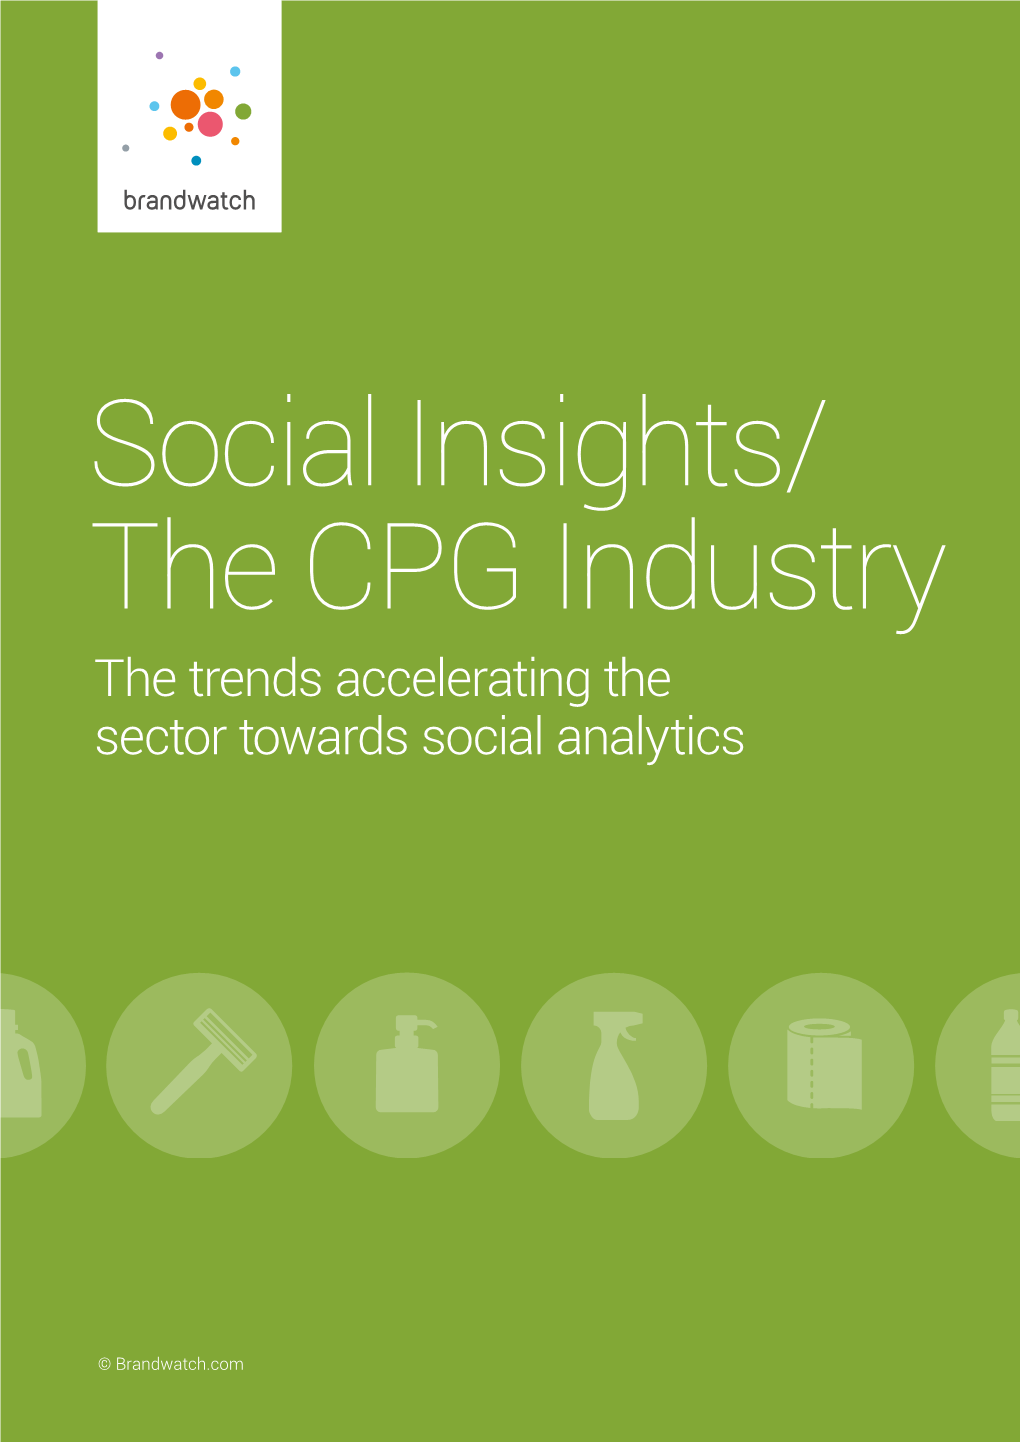 The Trends Accelerating the Sector Towards Social Analytics